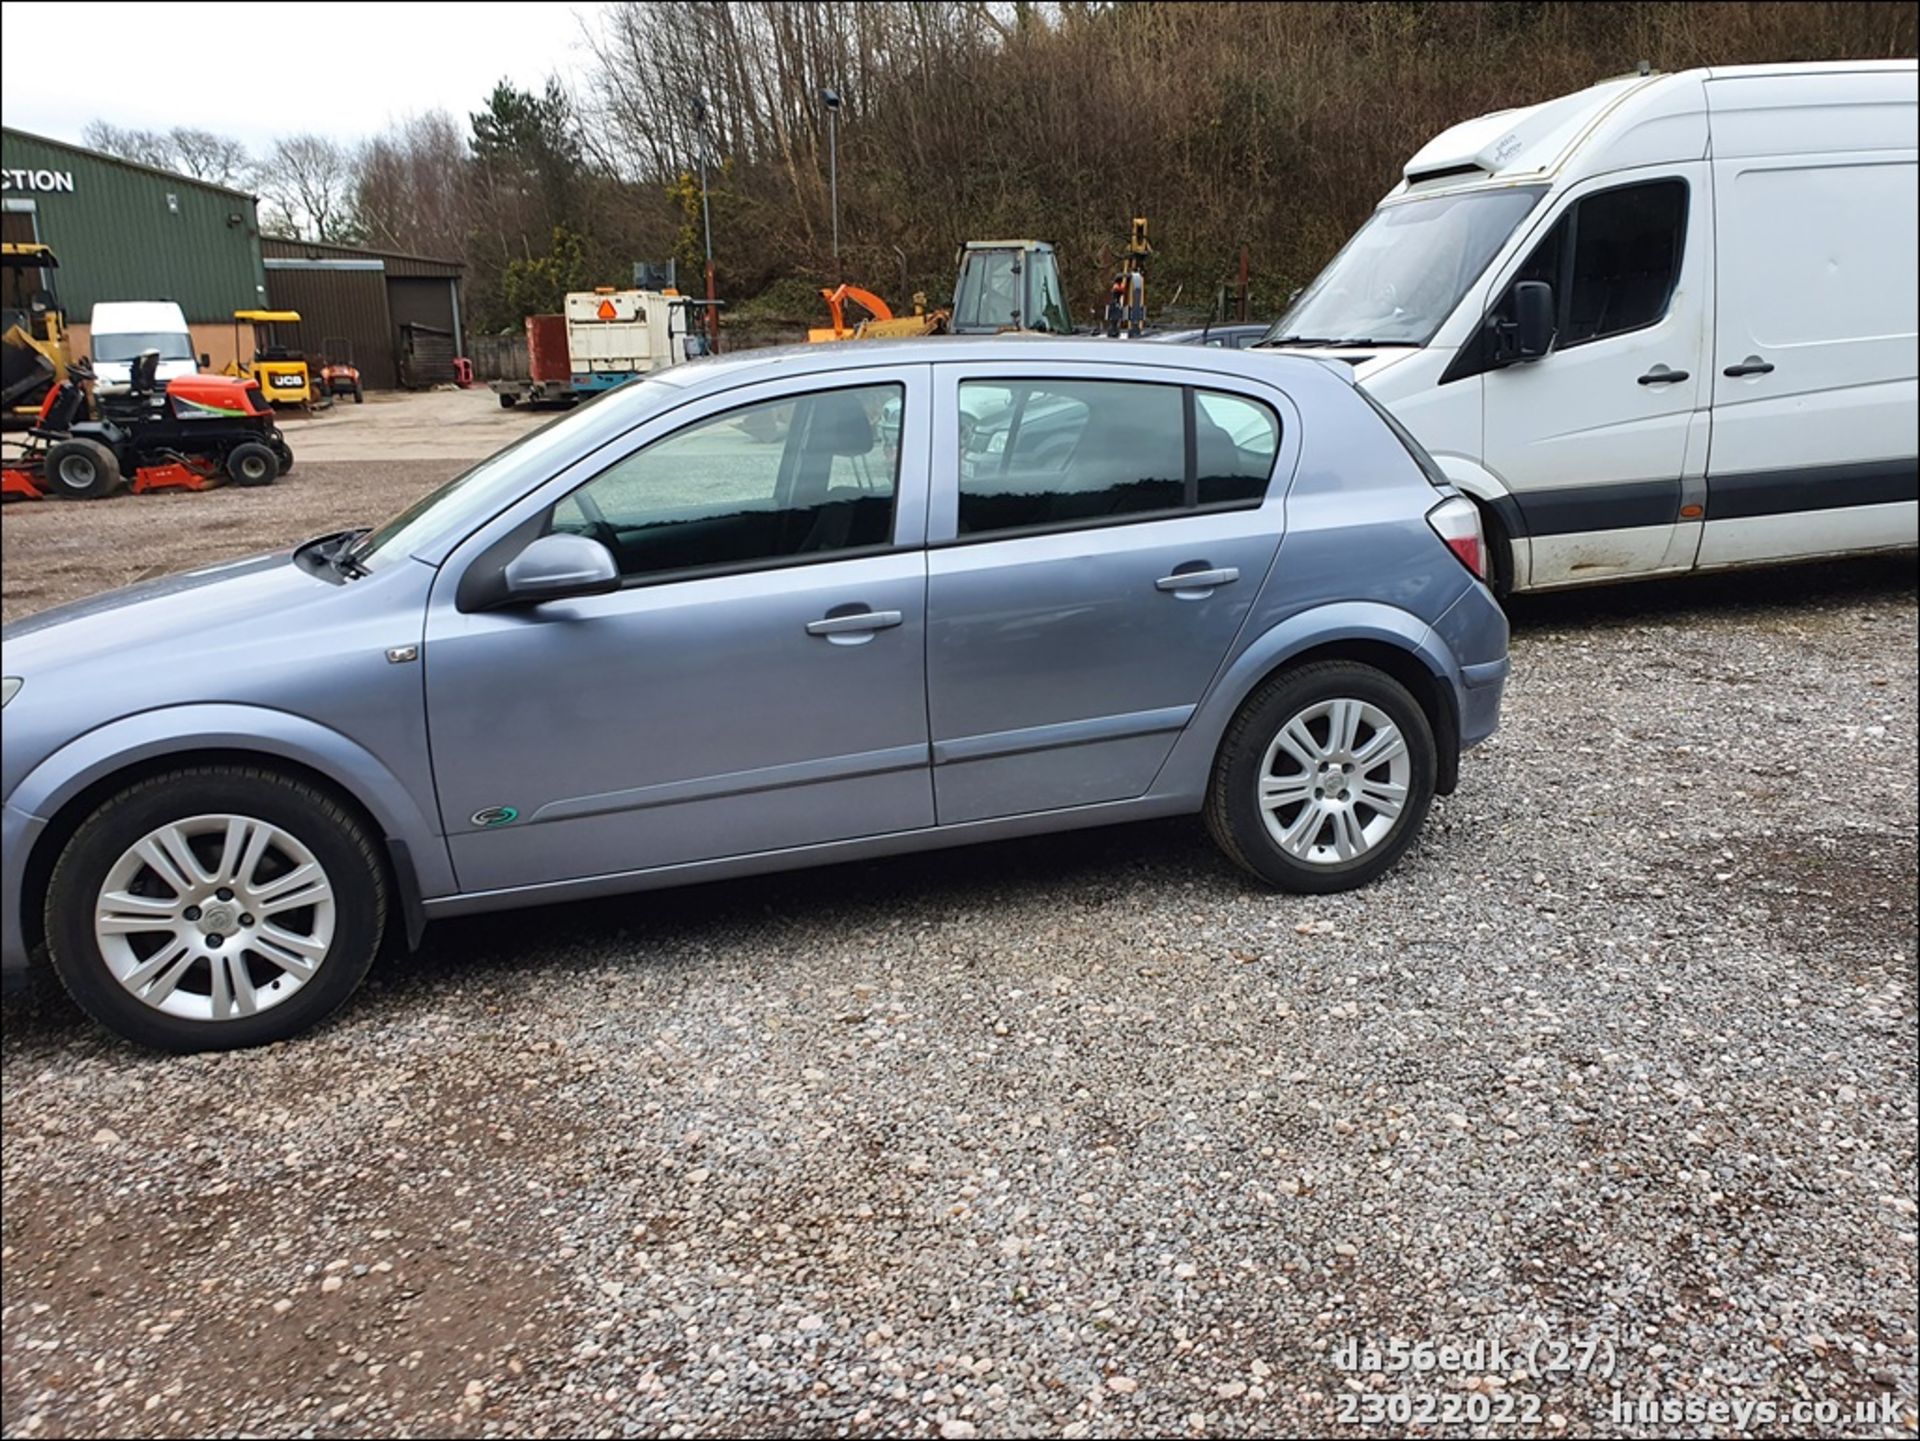 06/56 VAUXHALL ASTRA ACTIVE - 1598cc 5dr Hatchback (Silver) - Image 25 of 42